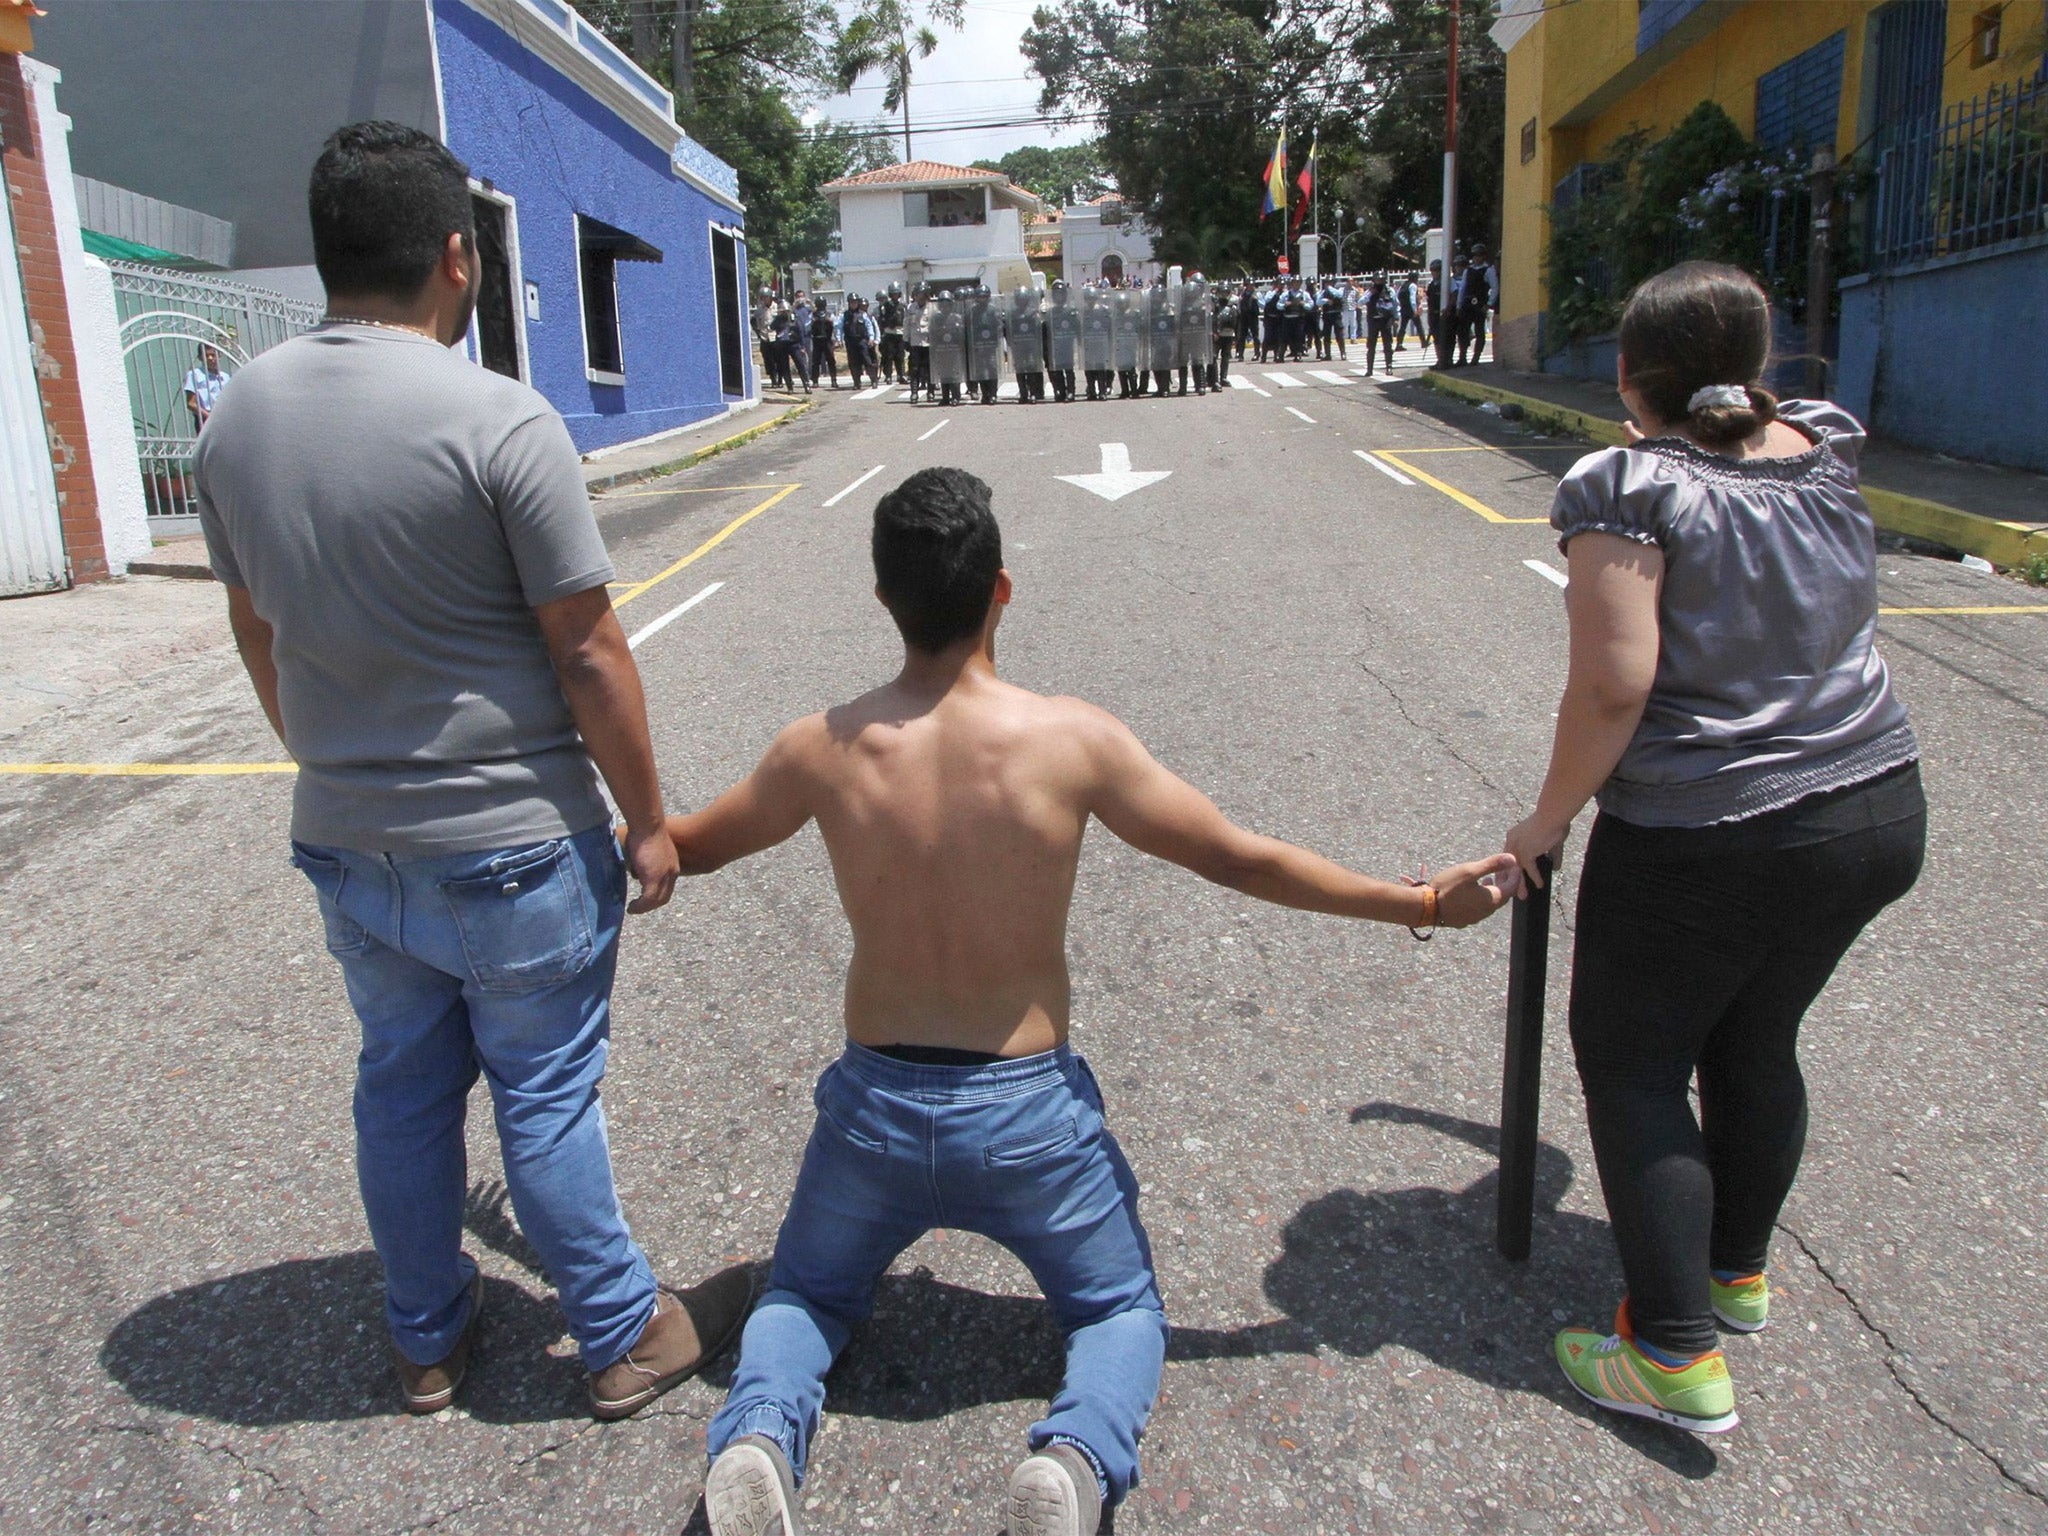 Anti-government protesters on the streets of San Cristobal on Tuesday during demonstrations in which a 14-year-old boy died after being shot in the head by a policeman